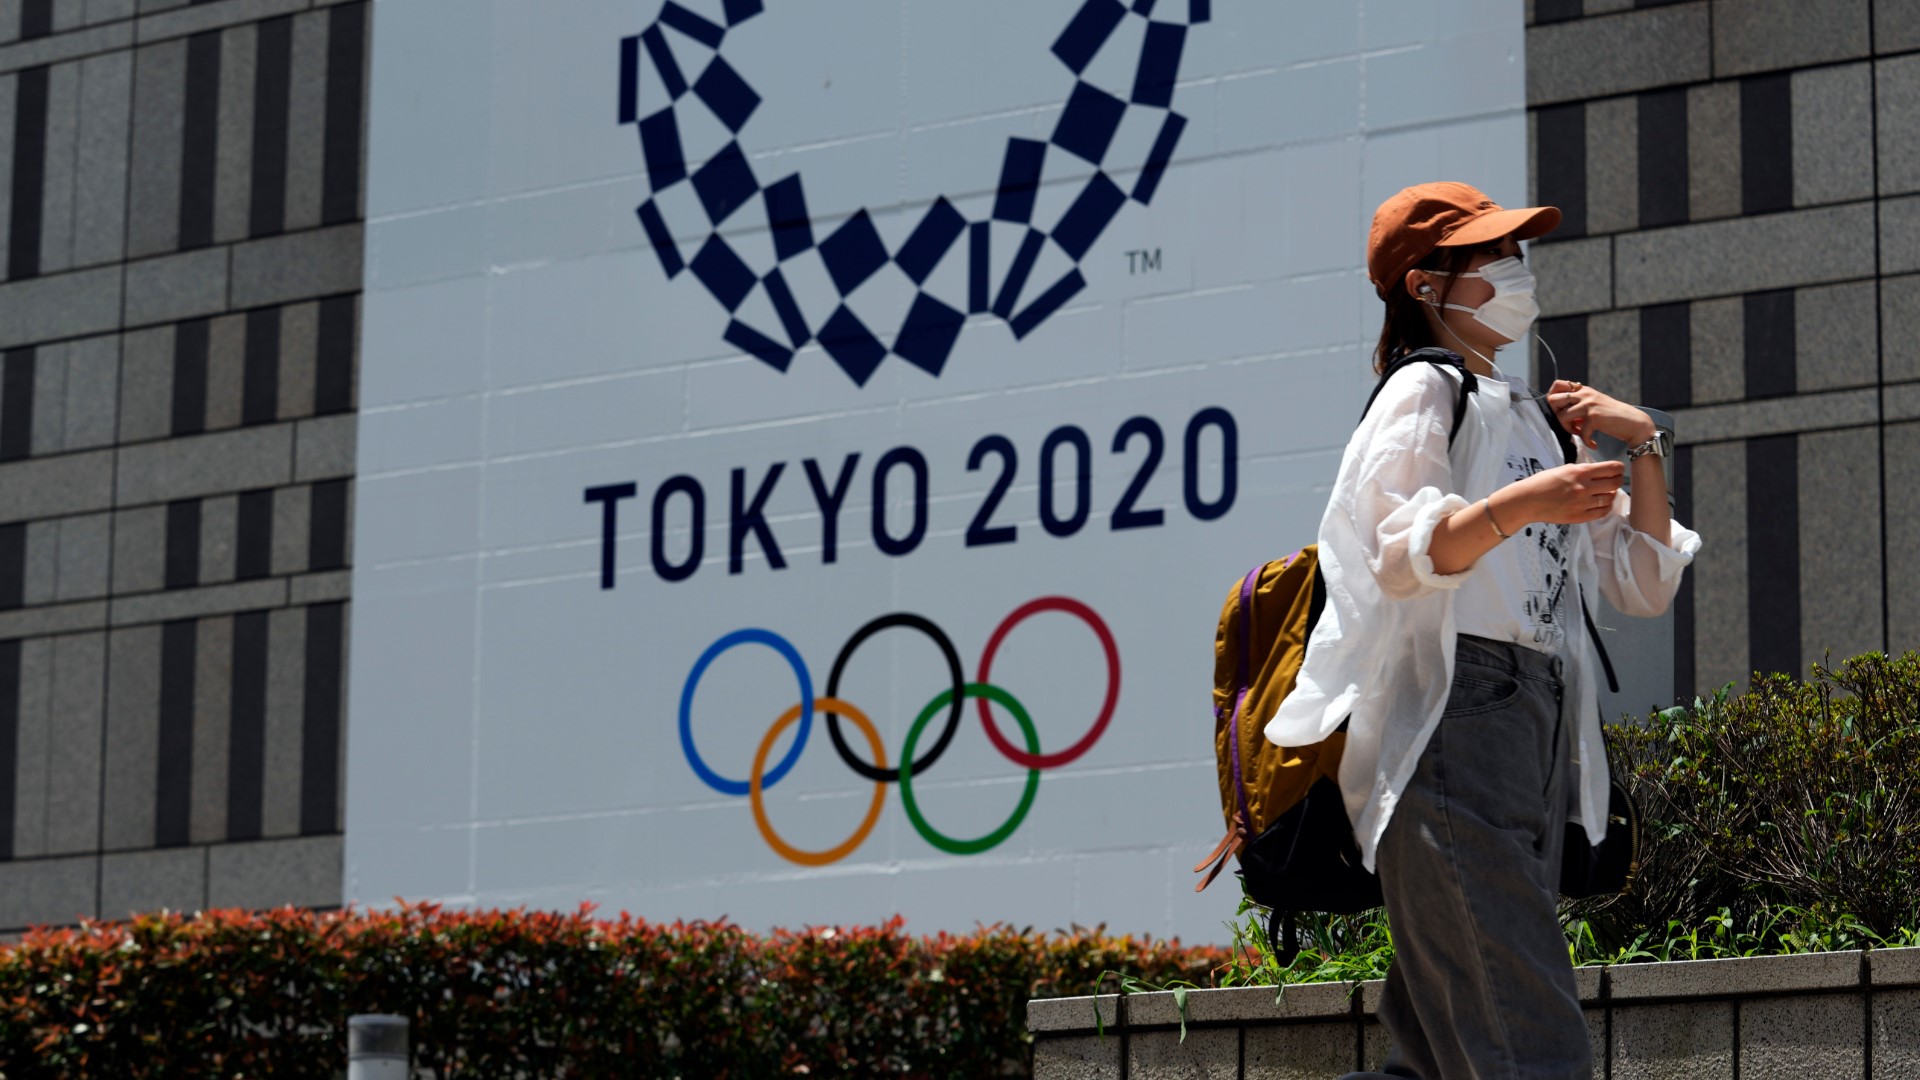 Surrounding the Games in Tokyo, people have shared misleading social media posts claiming Japan has banned Black Lives Matter apparel at the Olympics.